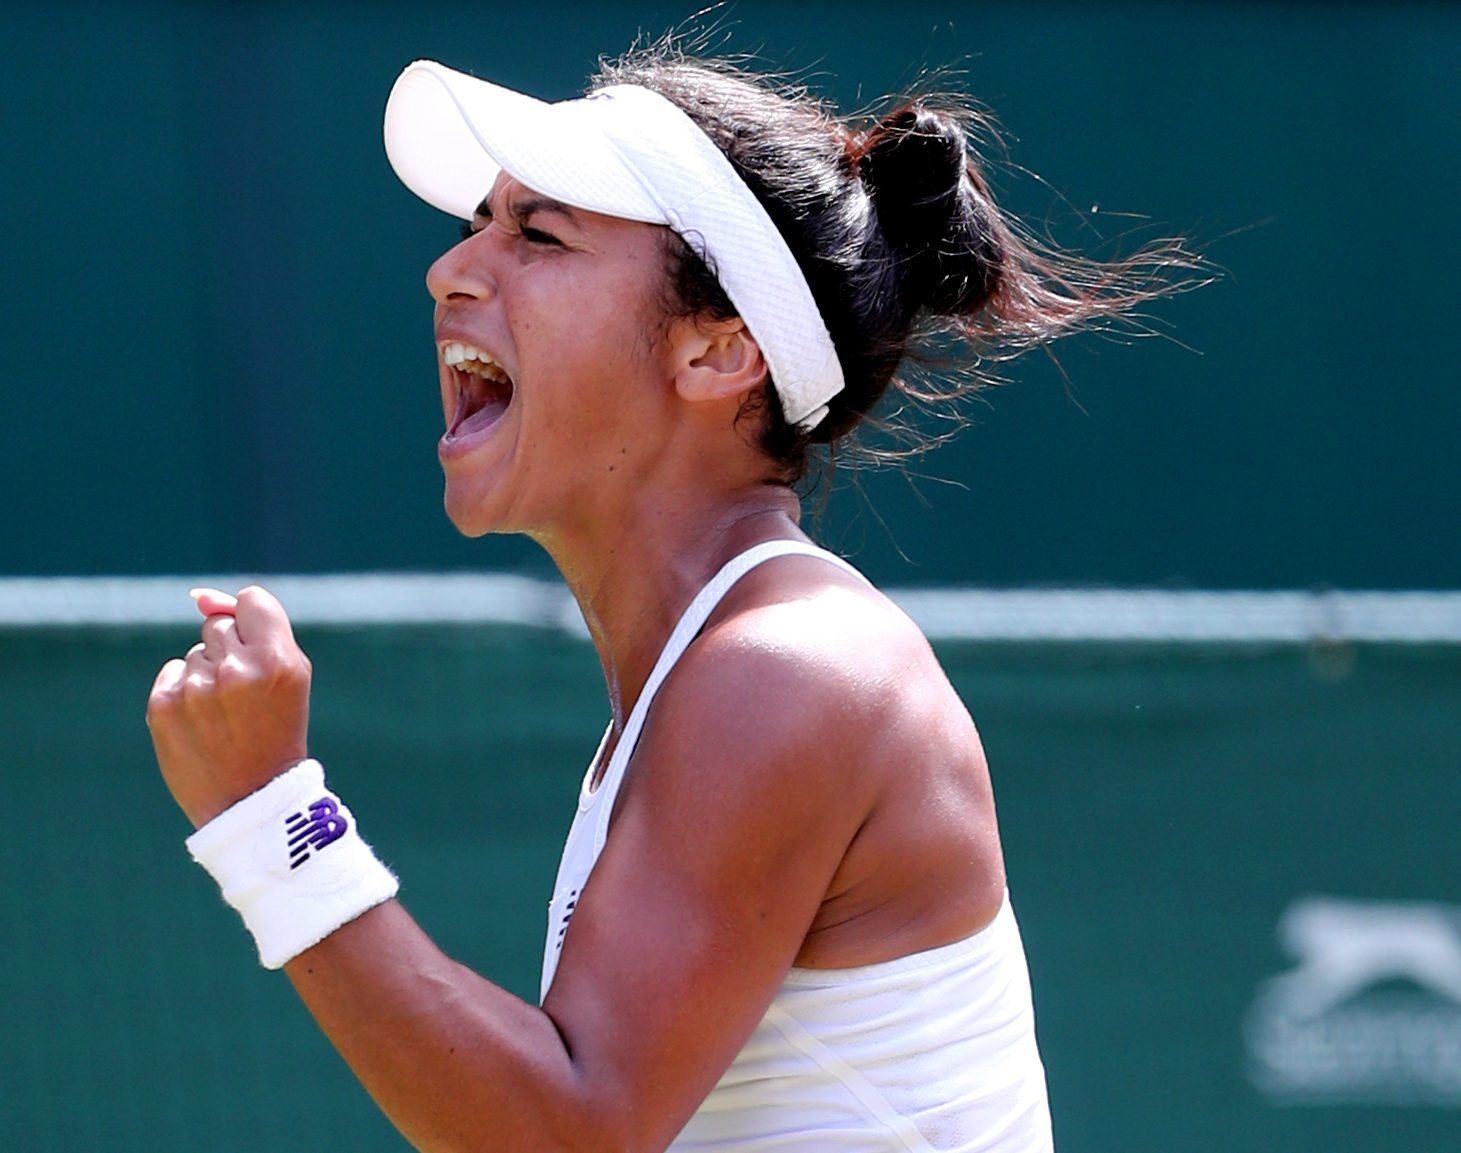 Heather Watson reacts during her match against Victoria Azarenka on day five of Wimbledon (Gareth Fuller/PA Wire)